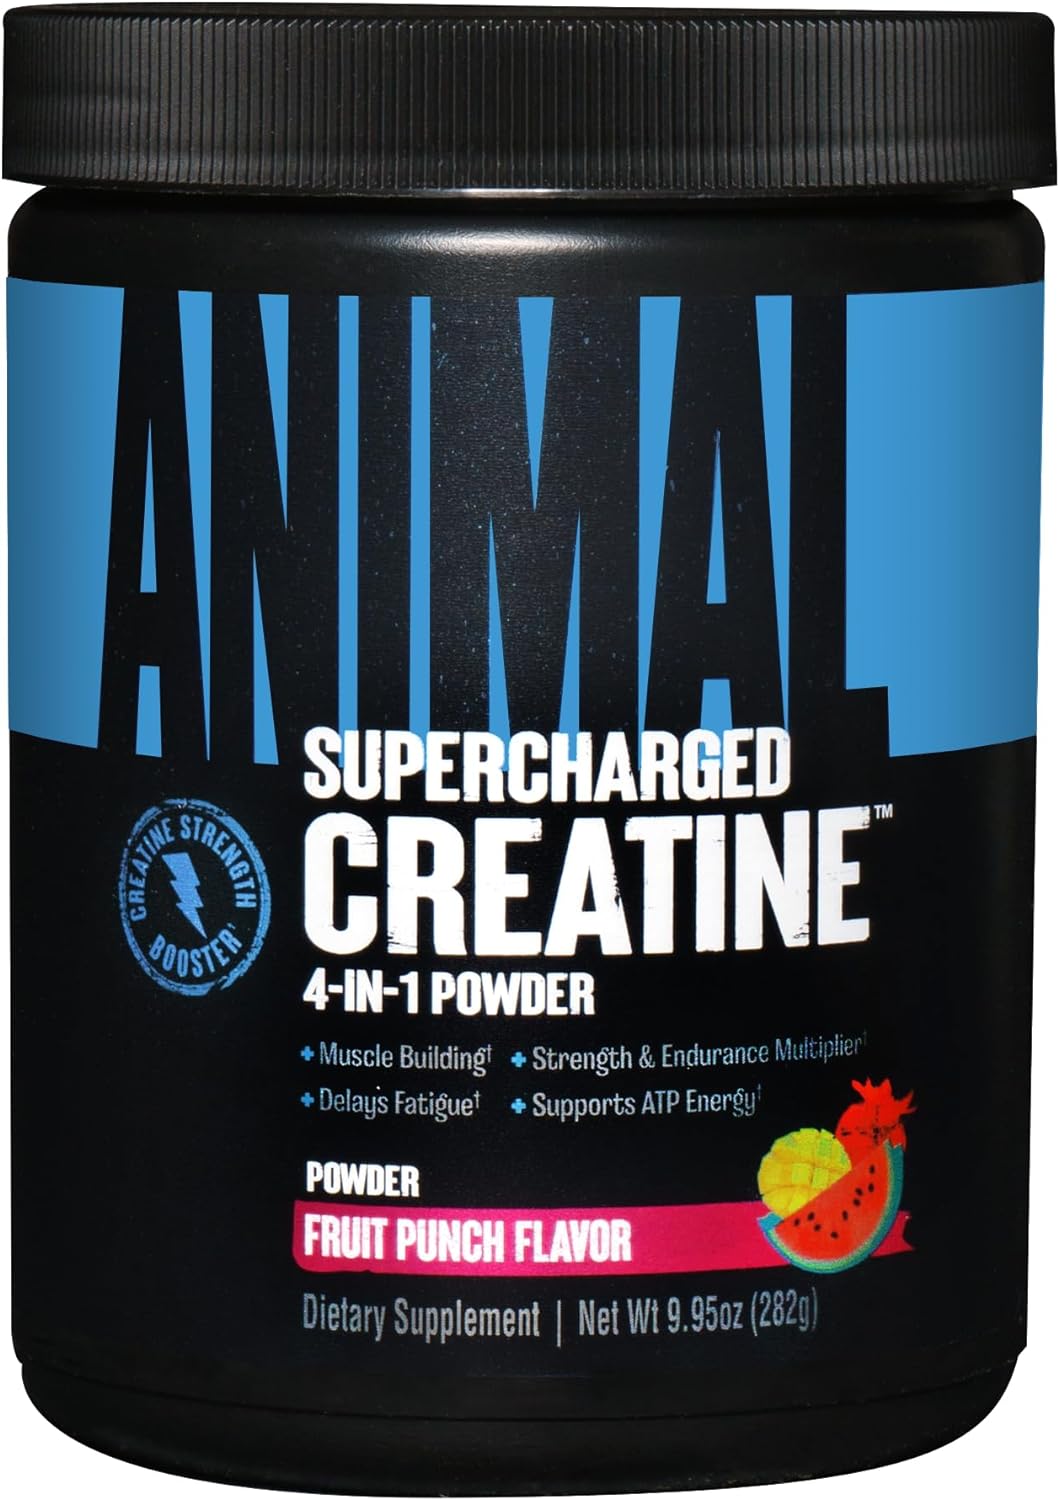 Animal Supercharged Creatine Powder -Enhanced Creatine Monohydrate Supplement Plus Betaine Anhydrous, PurpleForce and Senactiv - Delay Fatigue, Enhance Endurance, Improve Muscle Recovery -Fruit Punch